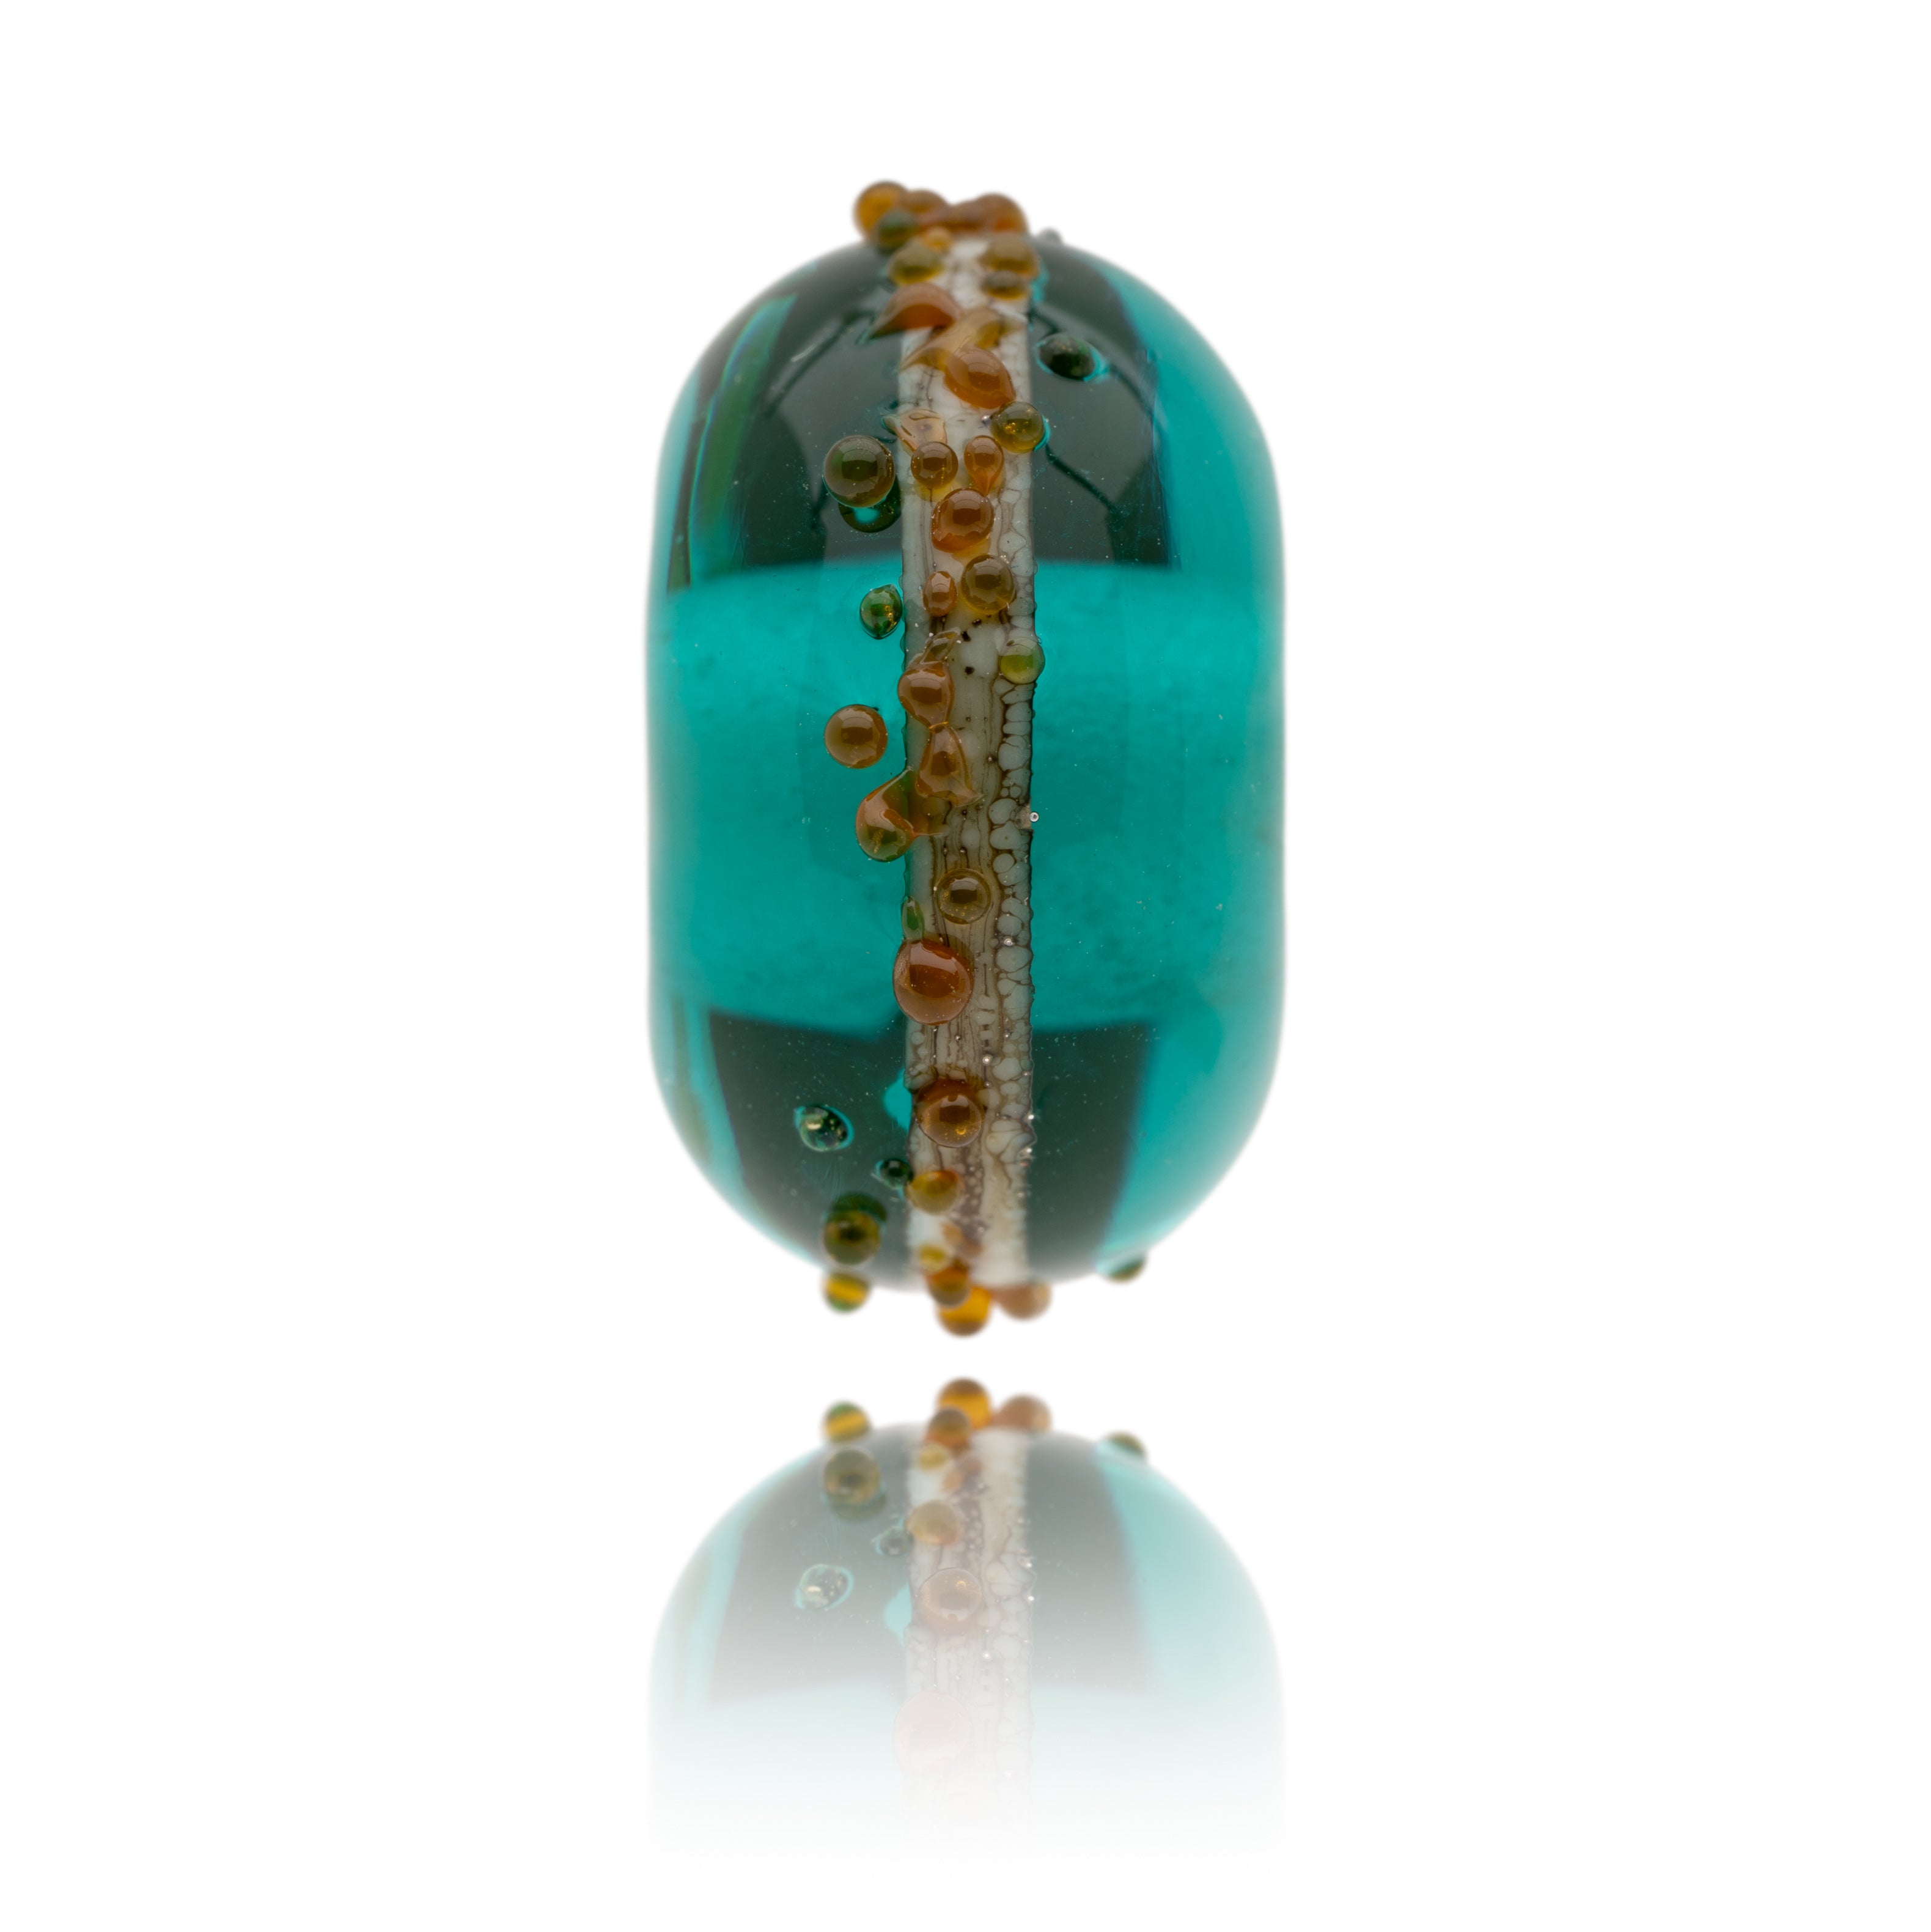 Transparent teal glass bead with silver and ivory stringer around the middle, representing Combe Martin in North Devon.